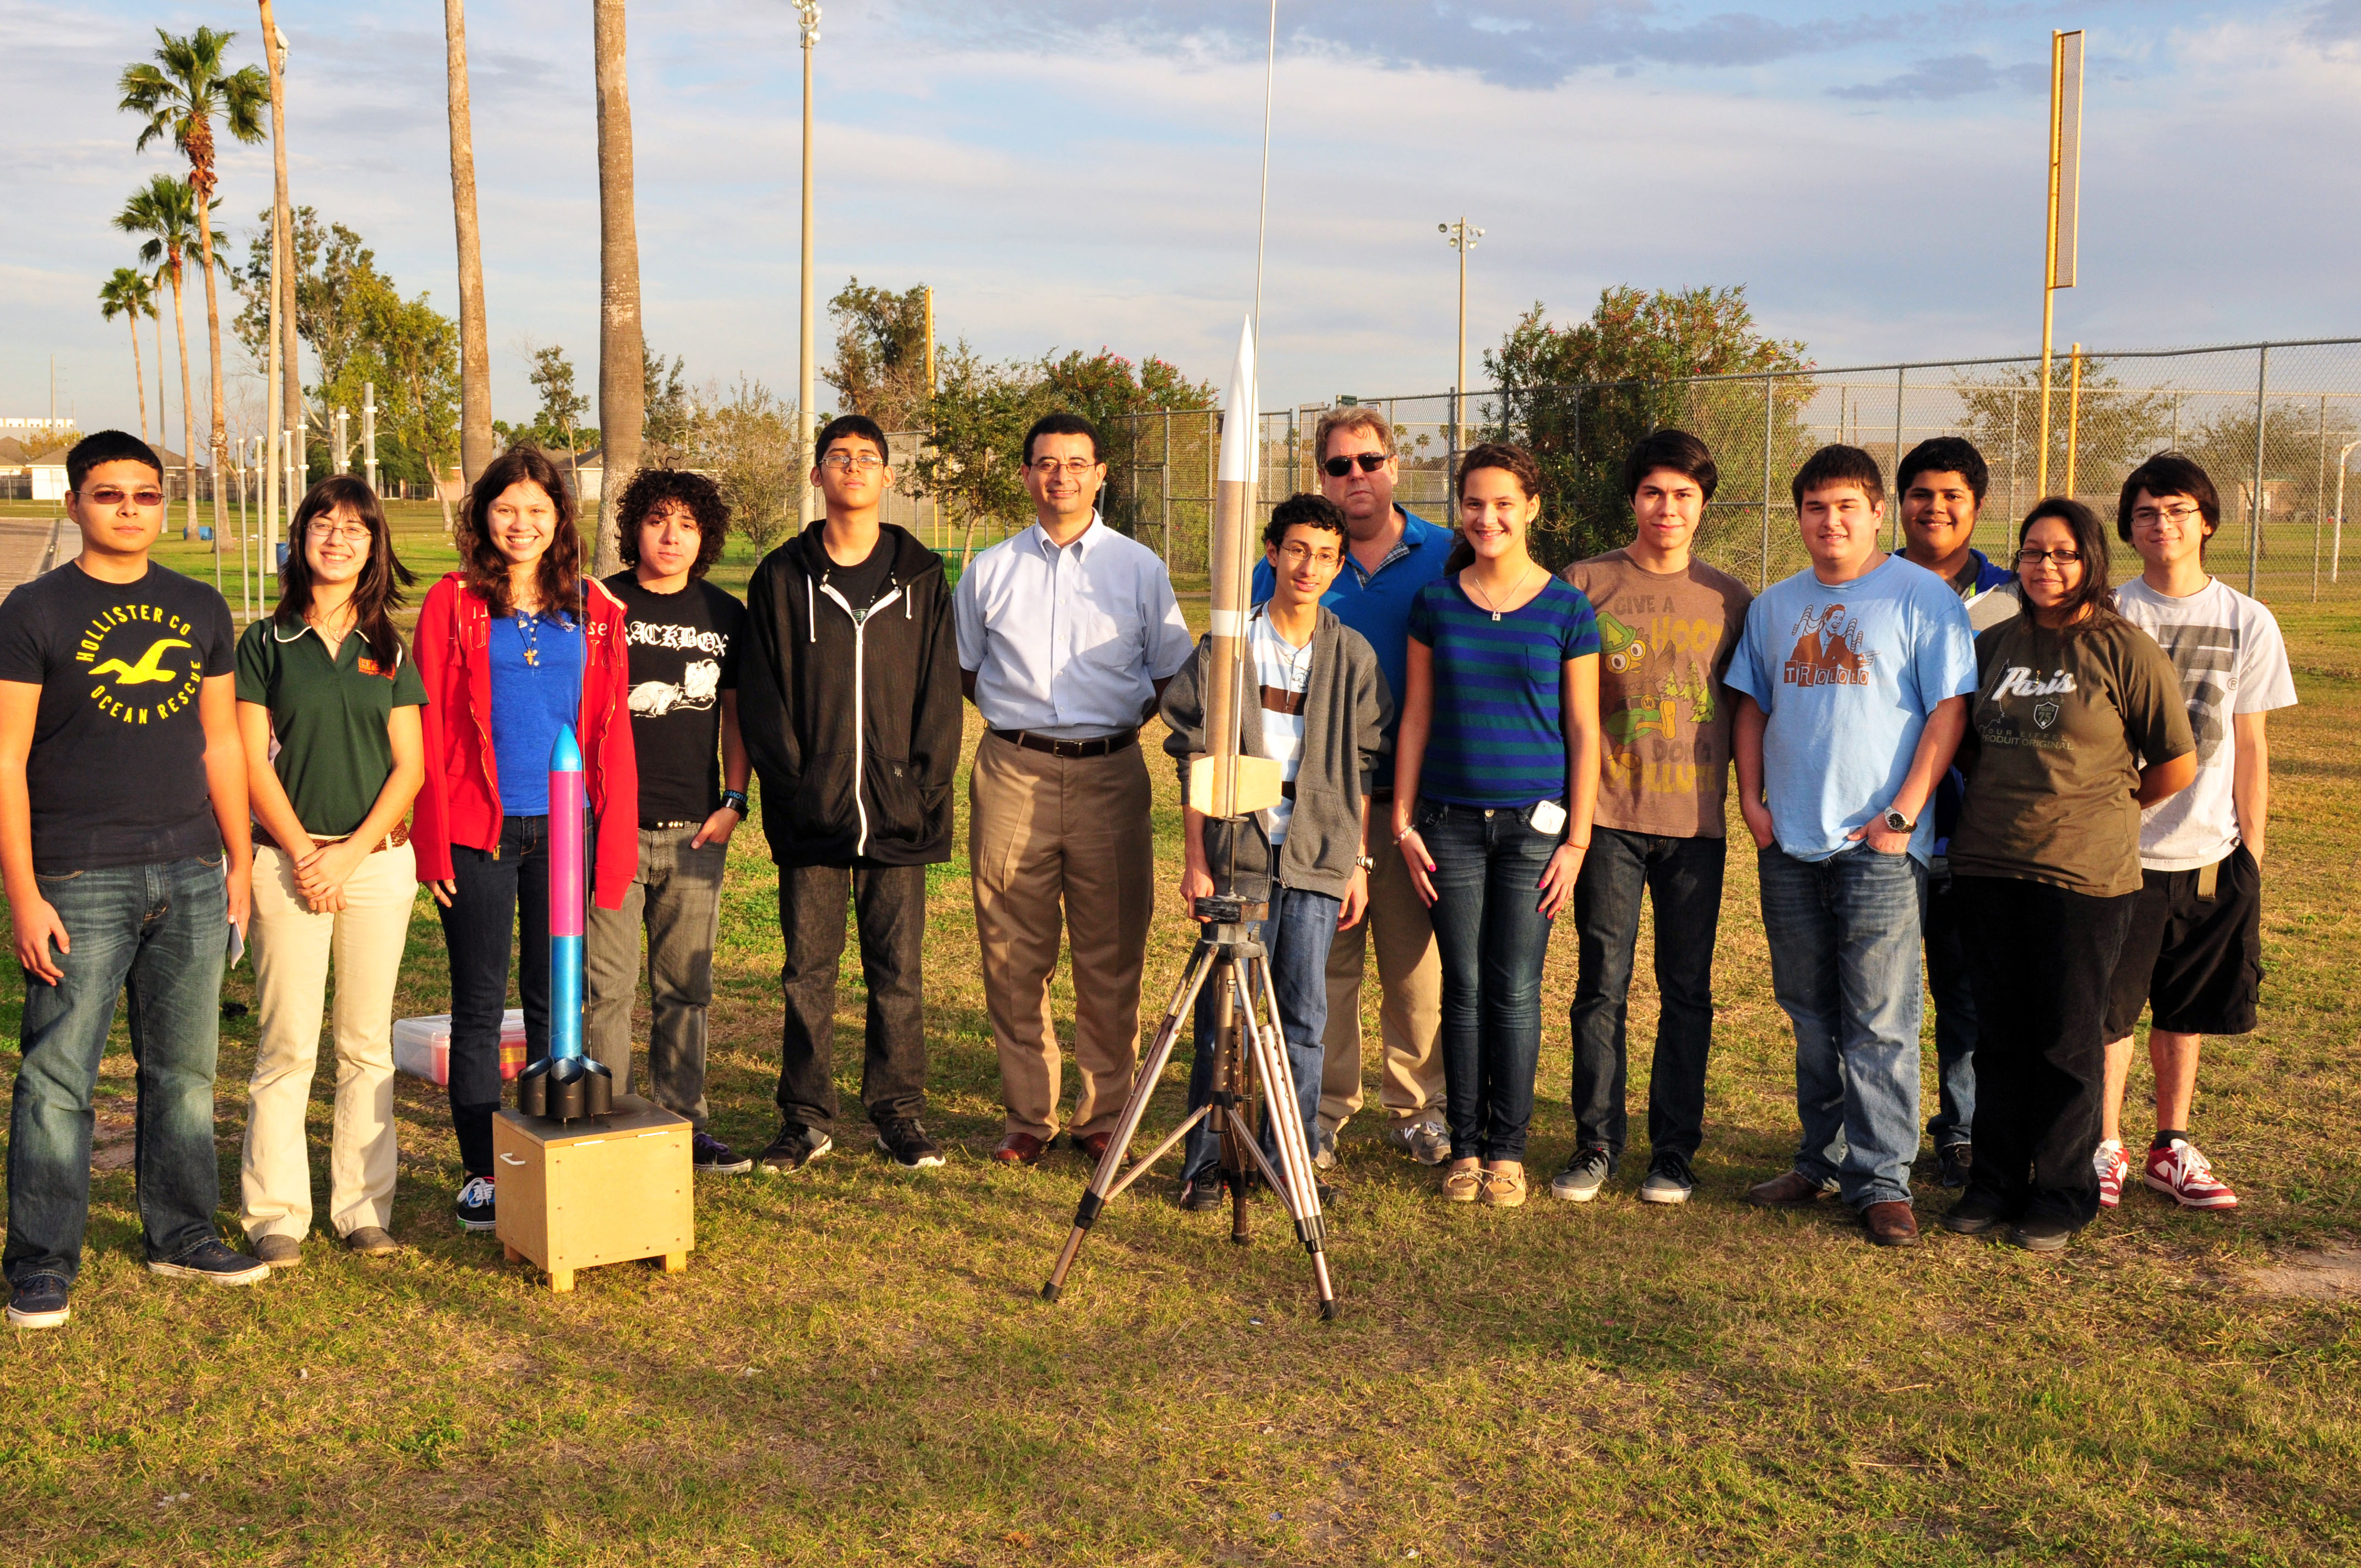 United Launch Alliance awards grant money to high school engineering clubs